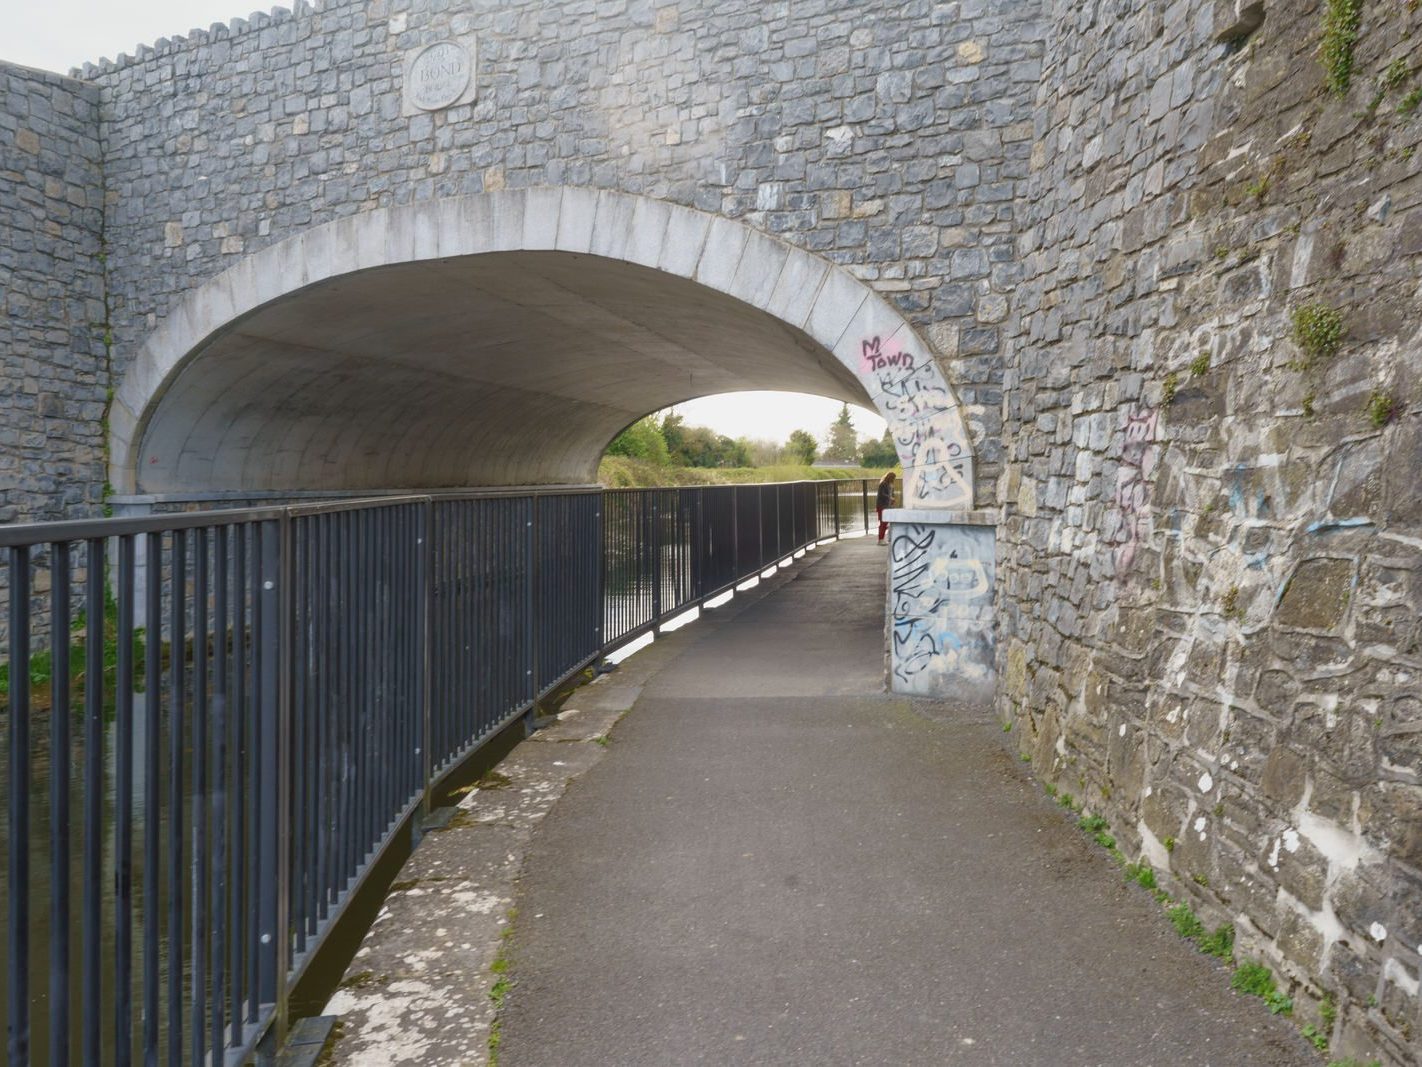 BOND BRIDGE ACROSS THE ROYAL CANAL IN MAYNOOTH [I WAS UNAWARE OF THIS BRIDGE UNTIL TODAY] 011